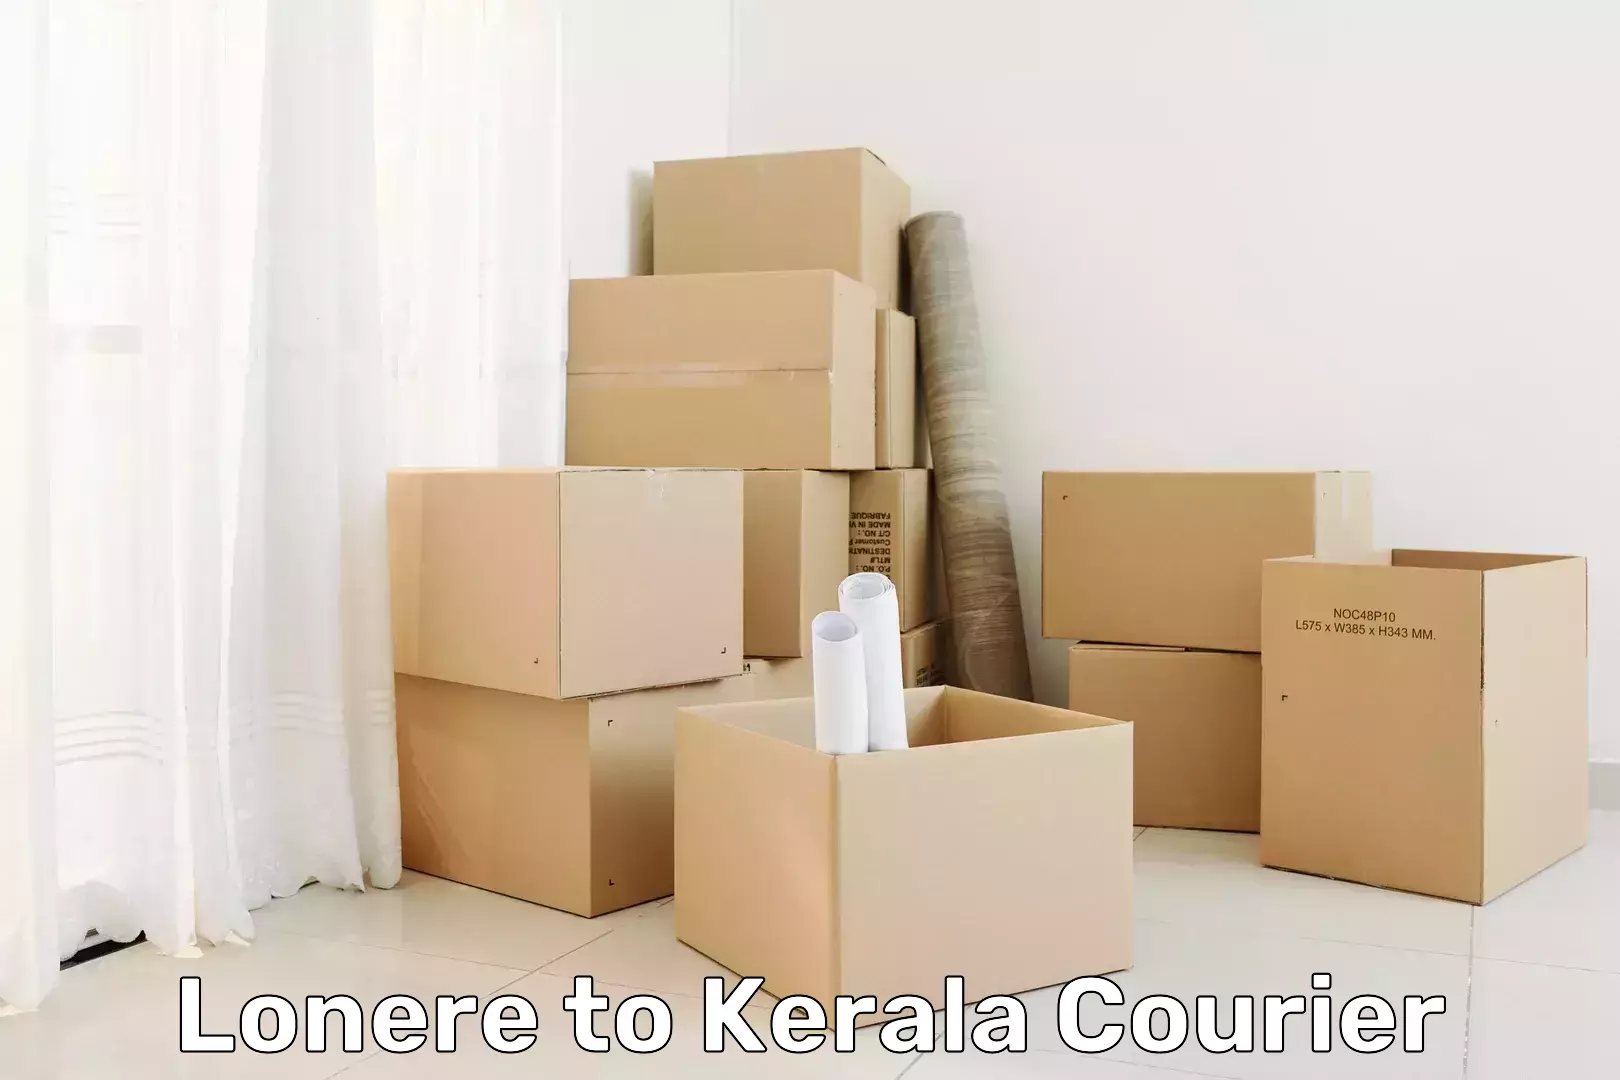 Express delivery capabilities Lonere to Kerala